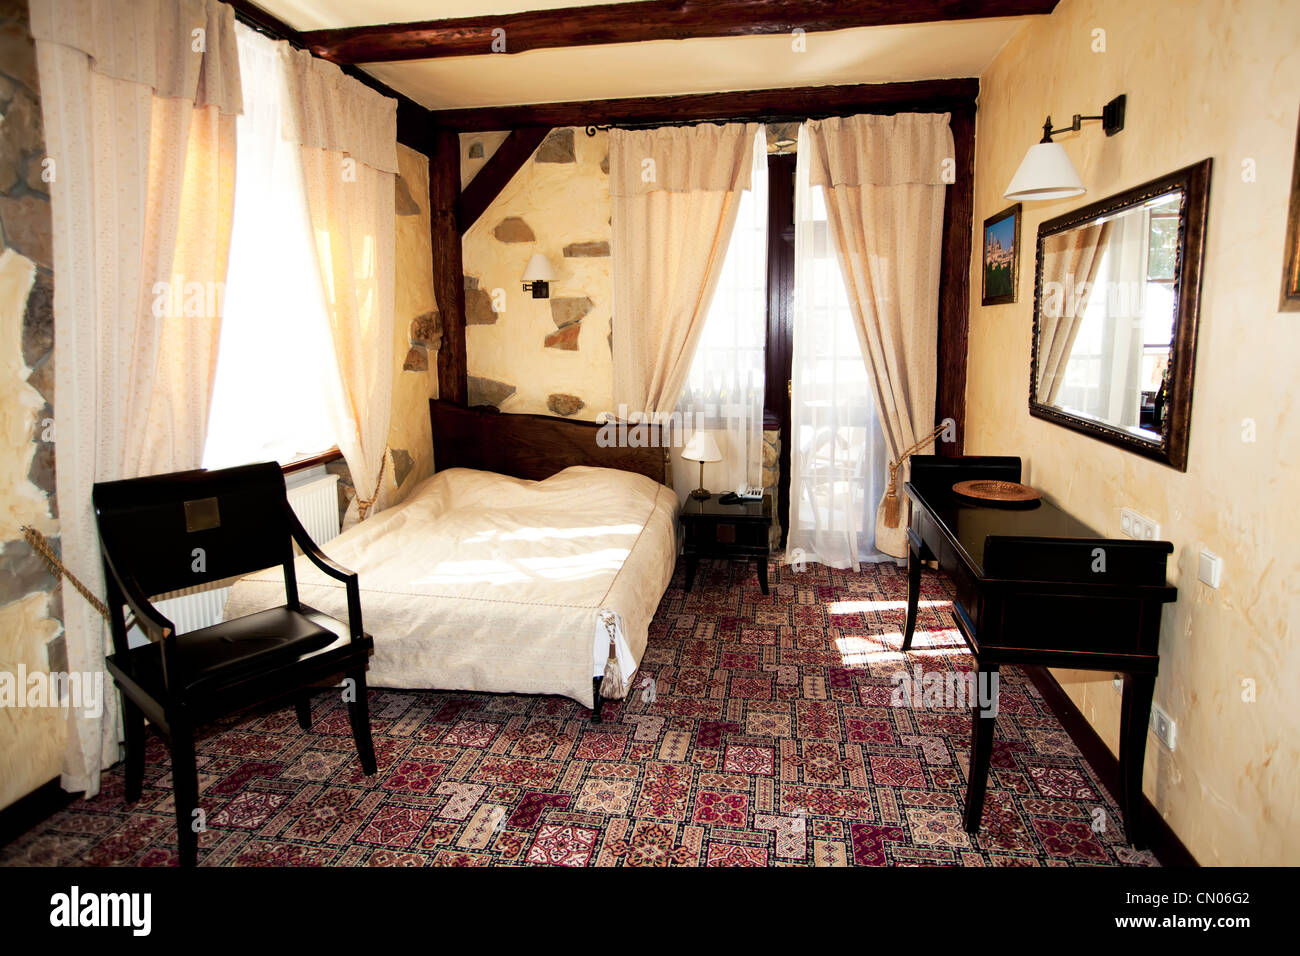 Room in medieval style Stock Photo